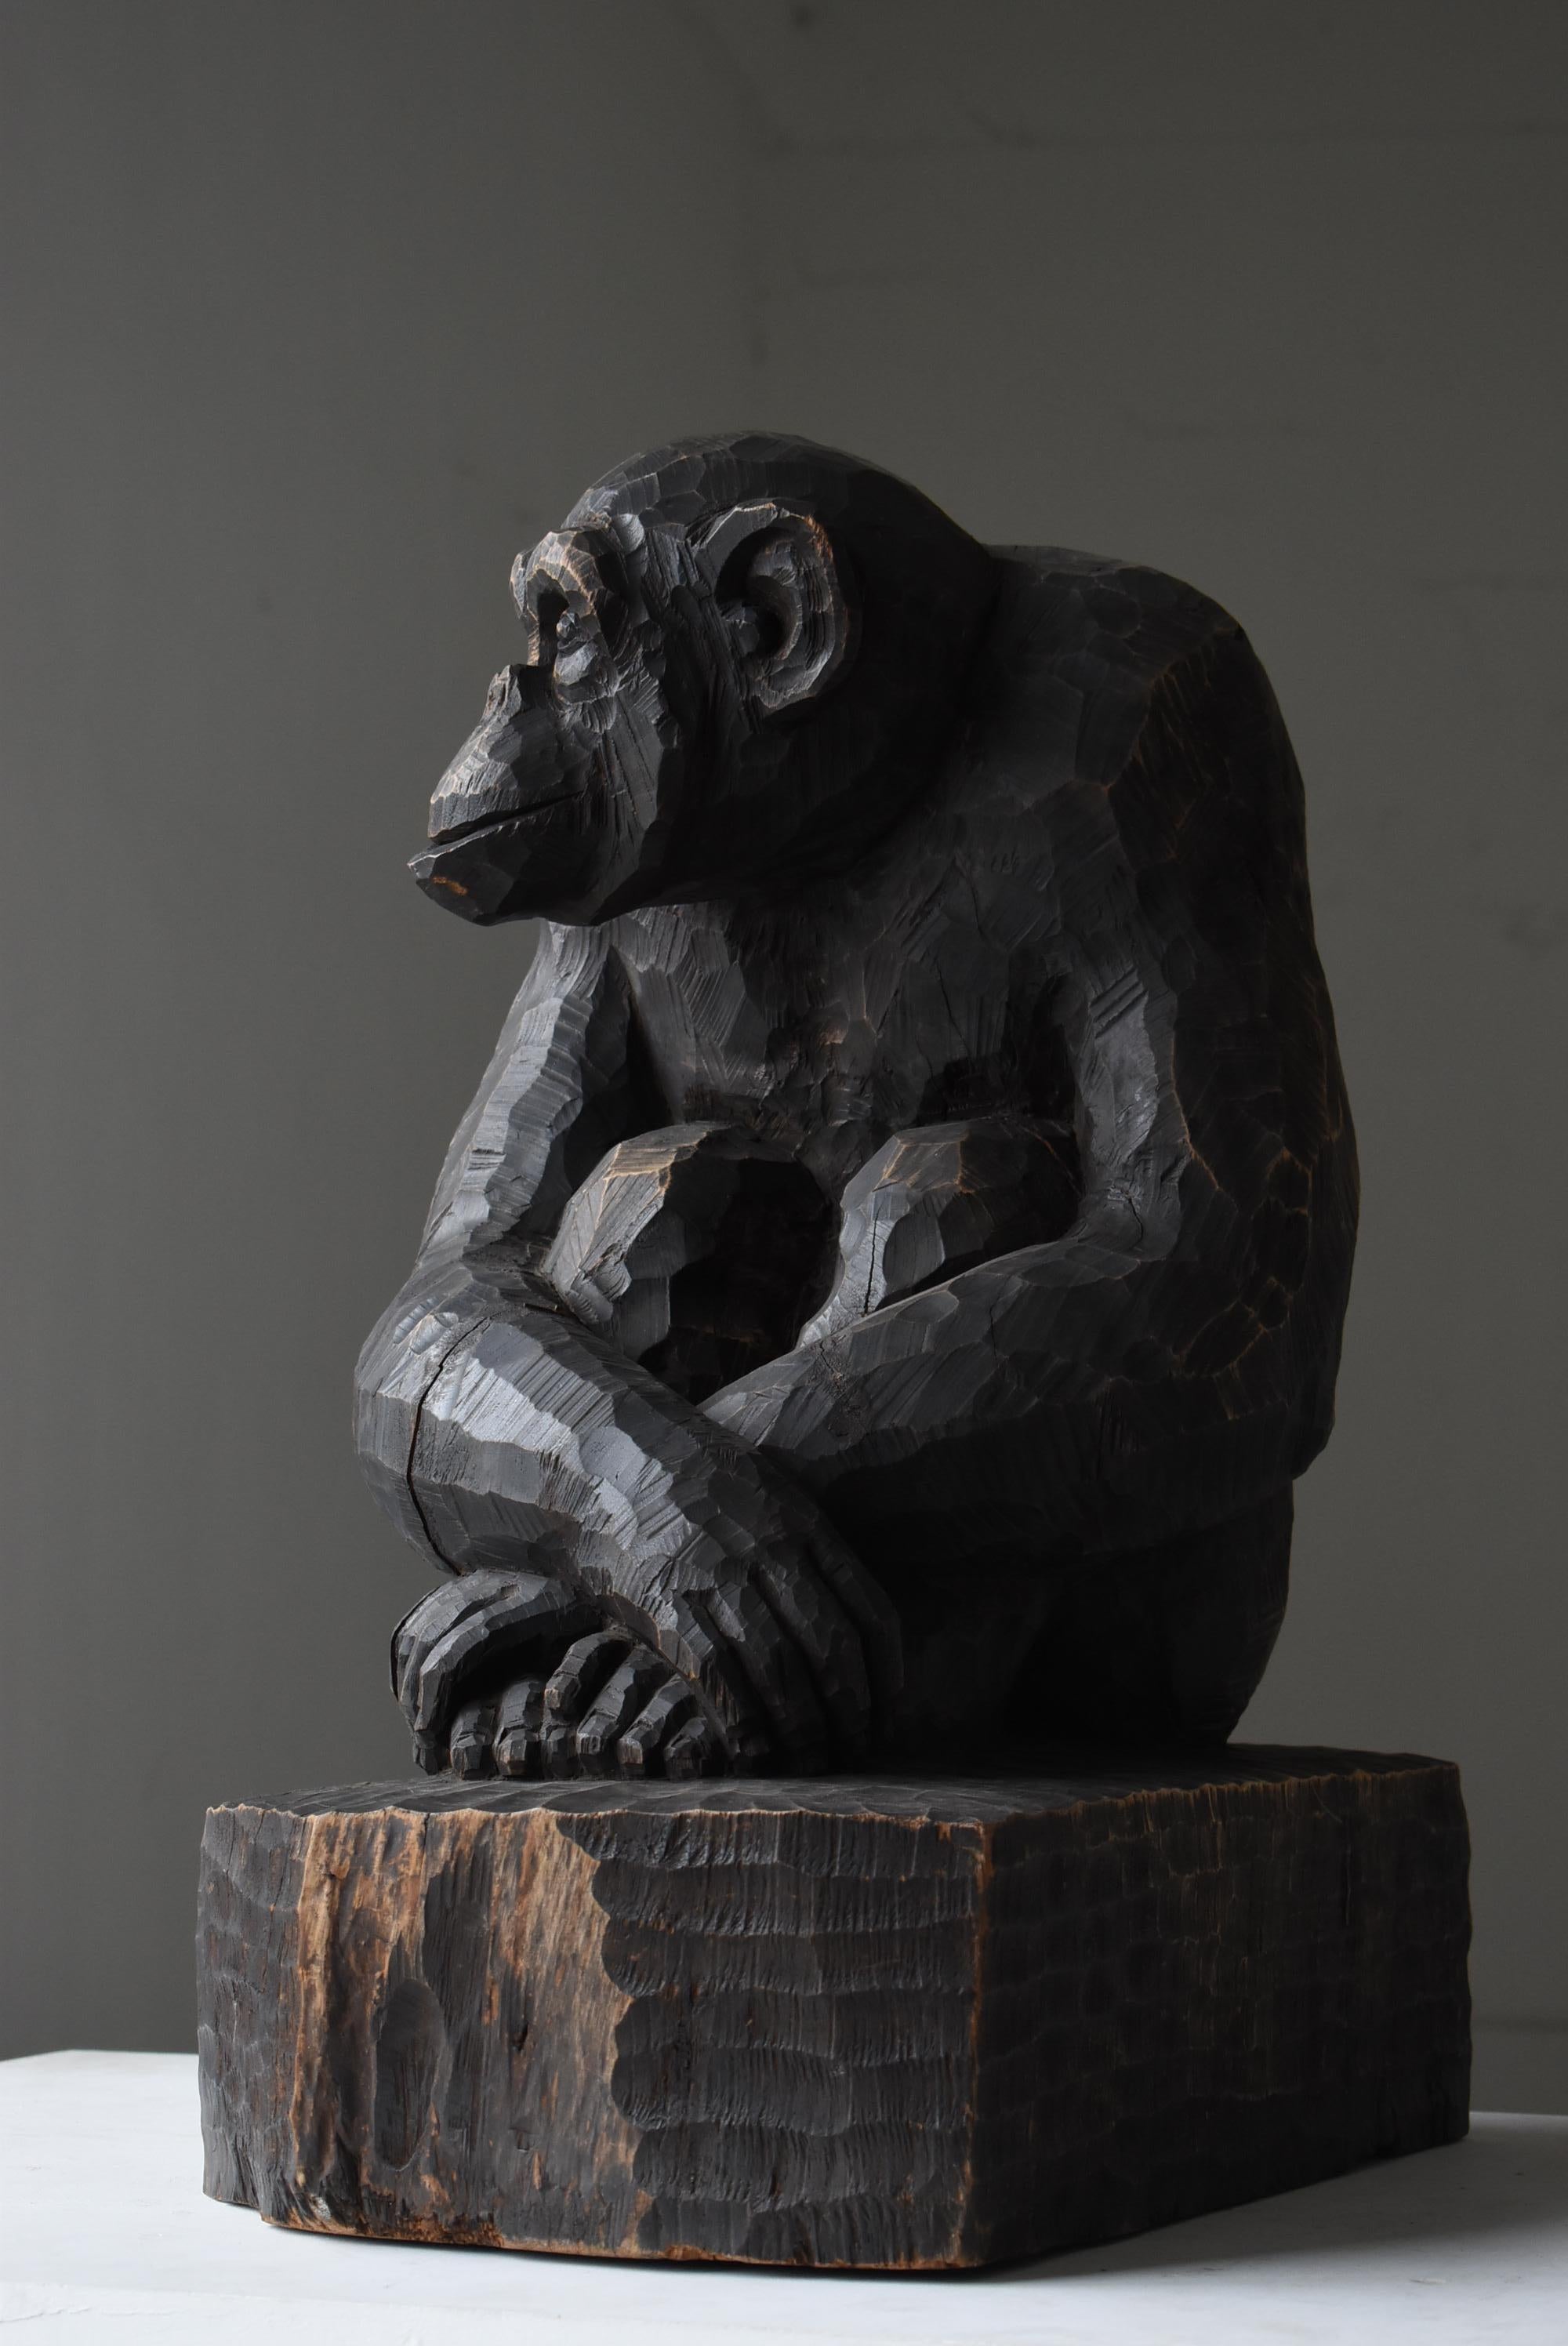 Showa Japanese Old Wood Sculpture Chimpanzee 1940s-1960s / Wood Carving Mingei  For Sale